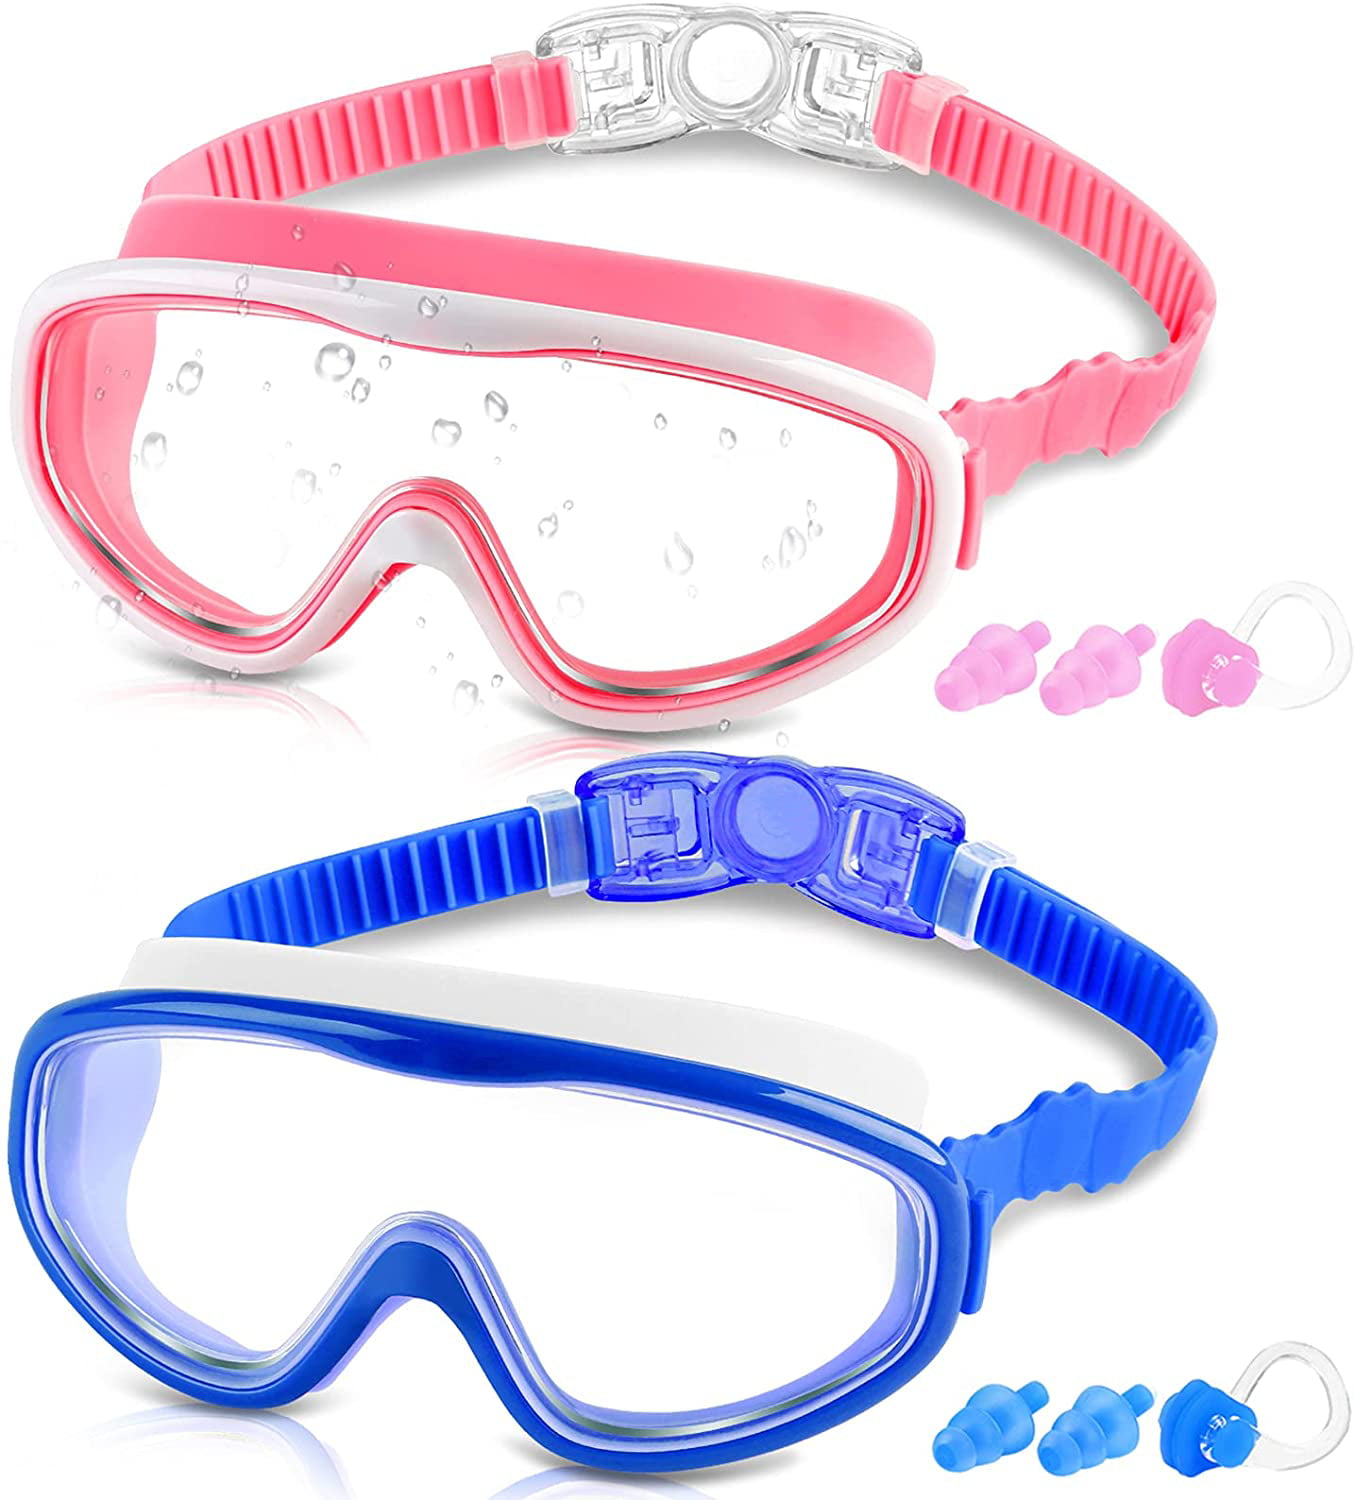 UV Protection Swimming Glasses for Children and Early Teens from 3 to 15 Years Old Yizerel 2 Pack Kids Swim Goggles Wide Vision Anti-Fog Waterproof 